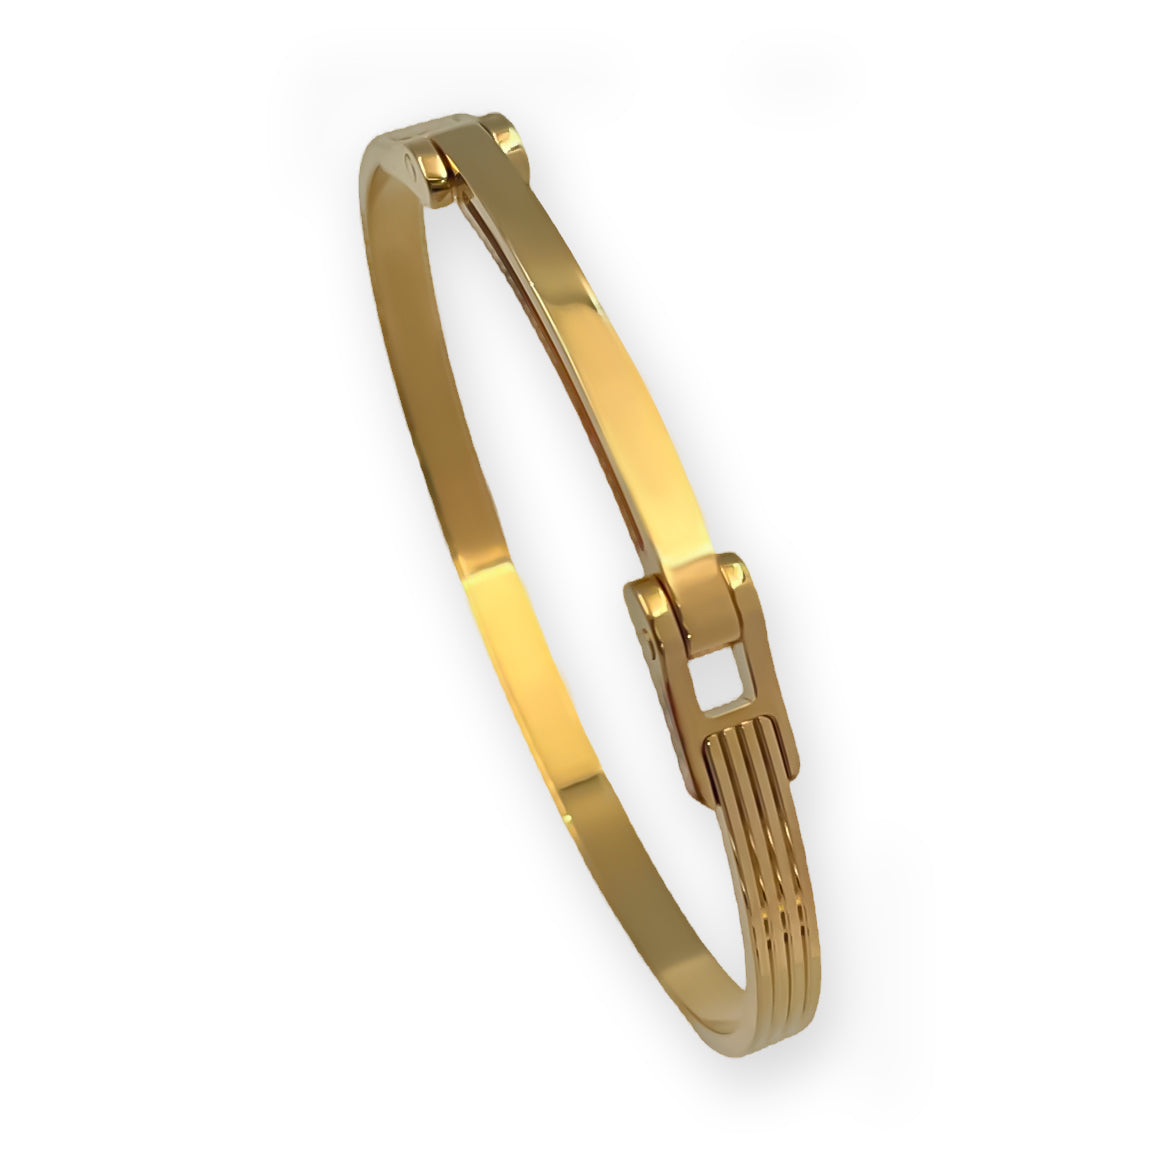 Bracelet MOTION-H 4mm with hinge yellow gold 18k 750